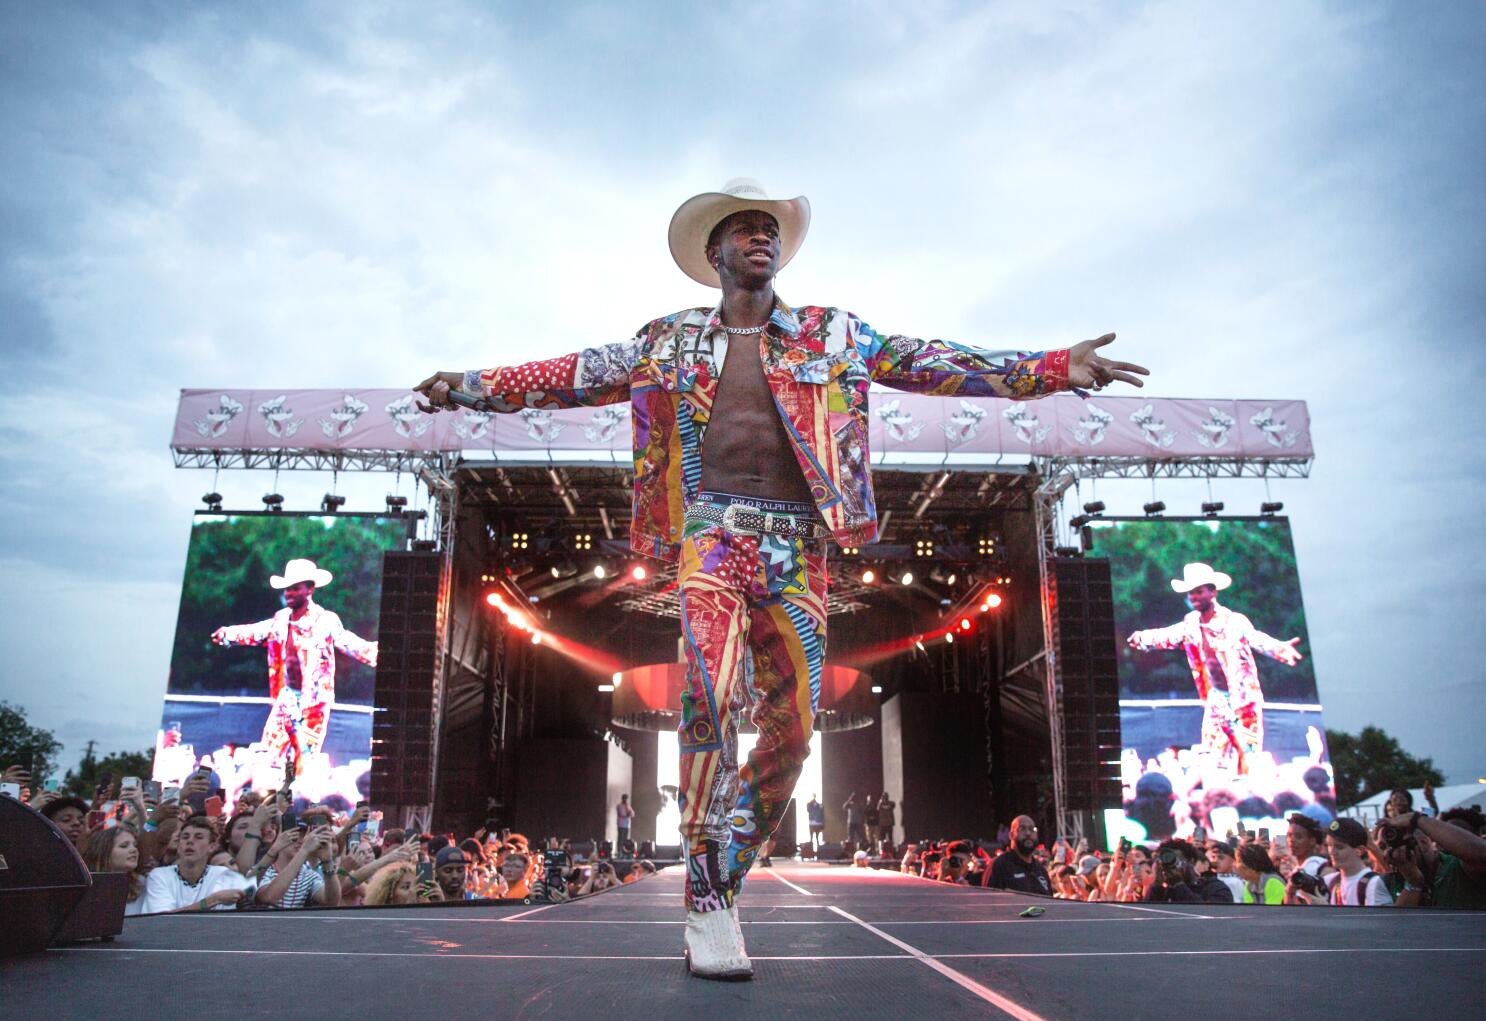 Lil Nas X, Tyler, the Creator lead wave of gay/bisexual rappers